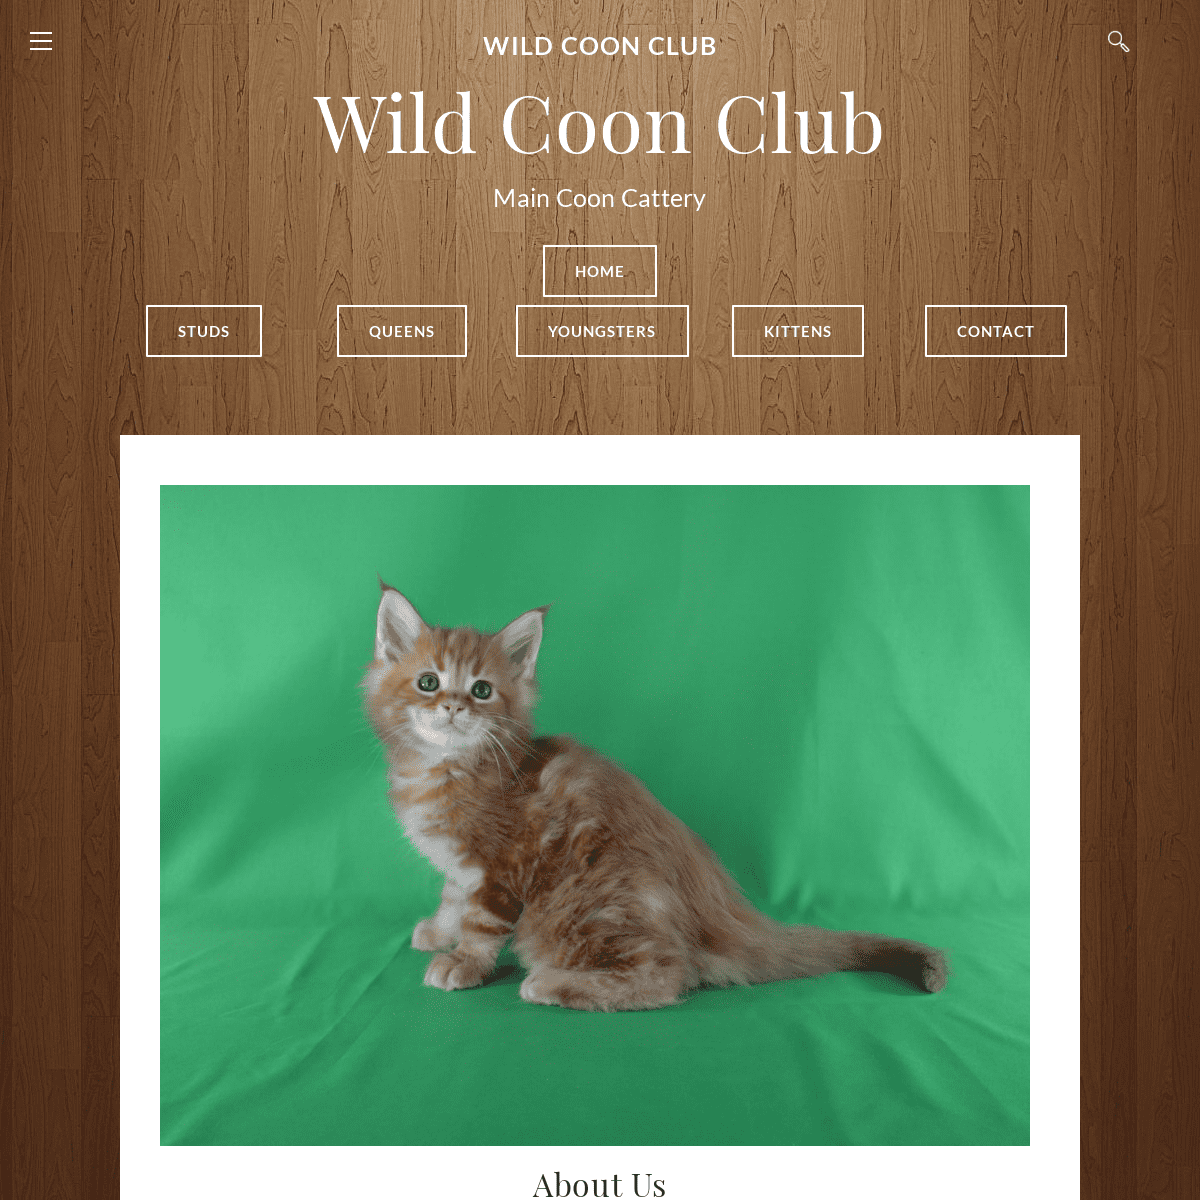 A complete backup of wildcoonclub.com